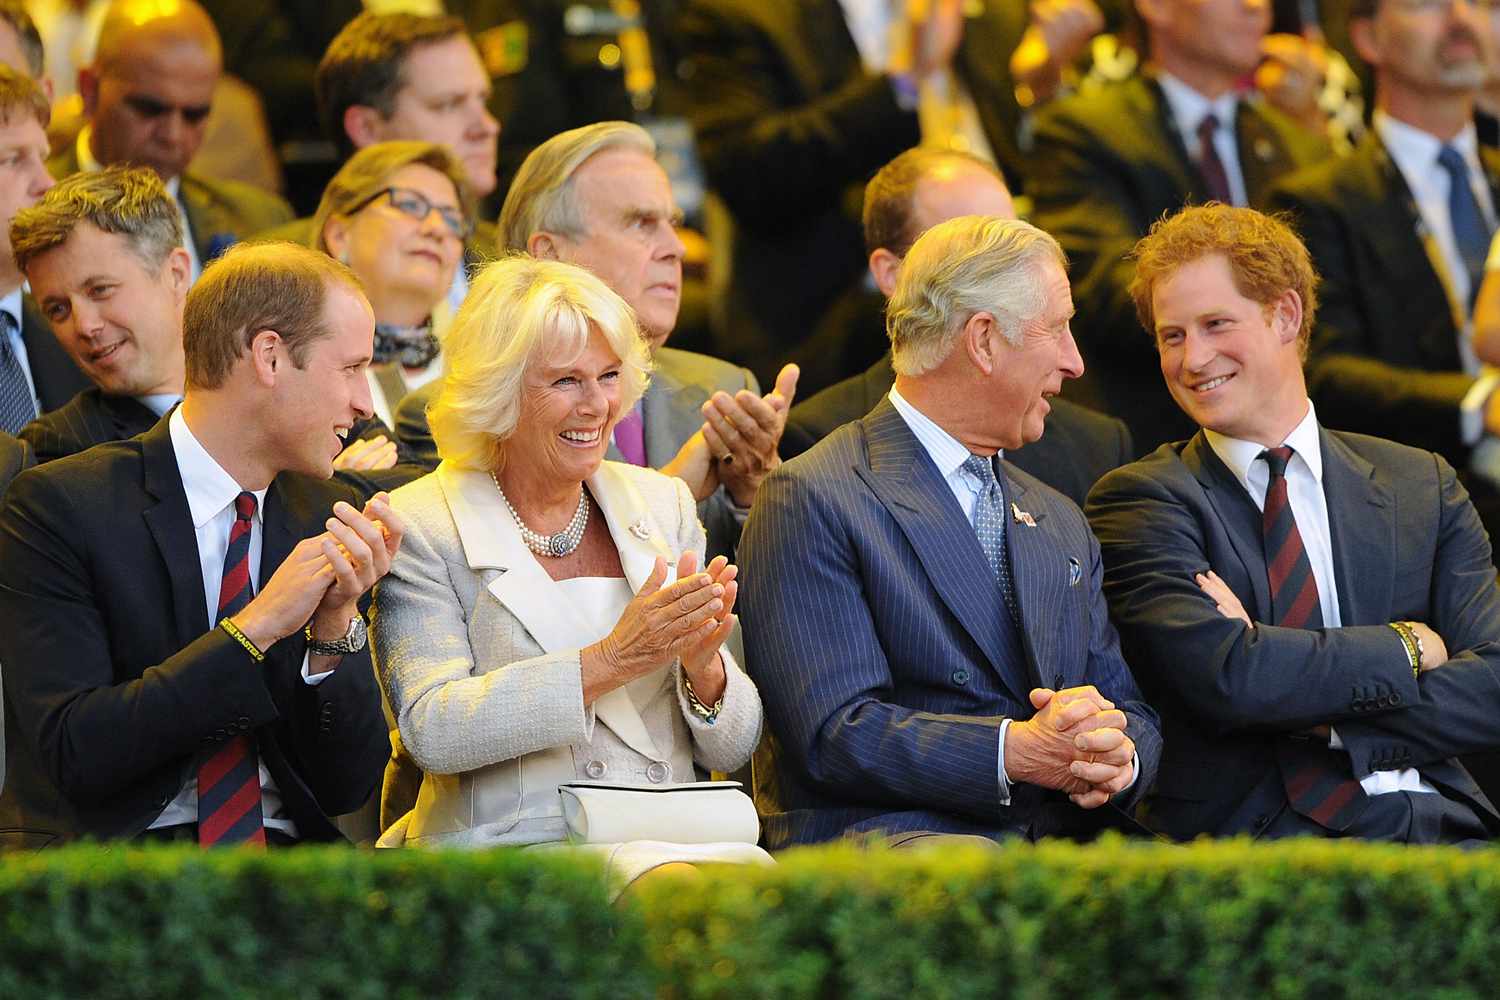 Prince William, Duke of Cambridge, Camilla, Duchess of Cornwall, Charles, Prince of Wales and Prince Harry attend the Opening Ceremony of the Invictus Games at Olympic Park on September 10, 2014 in London, England